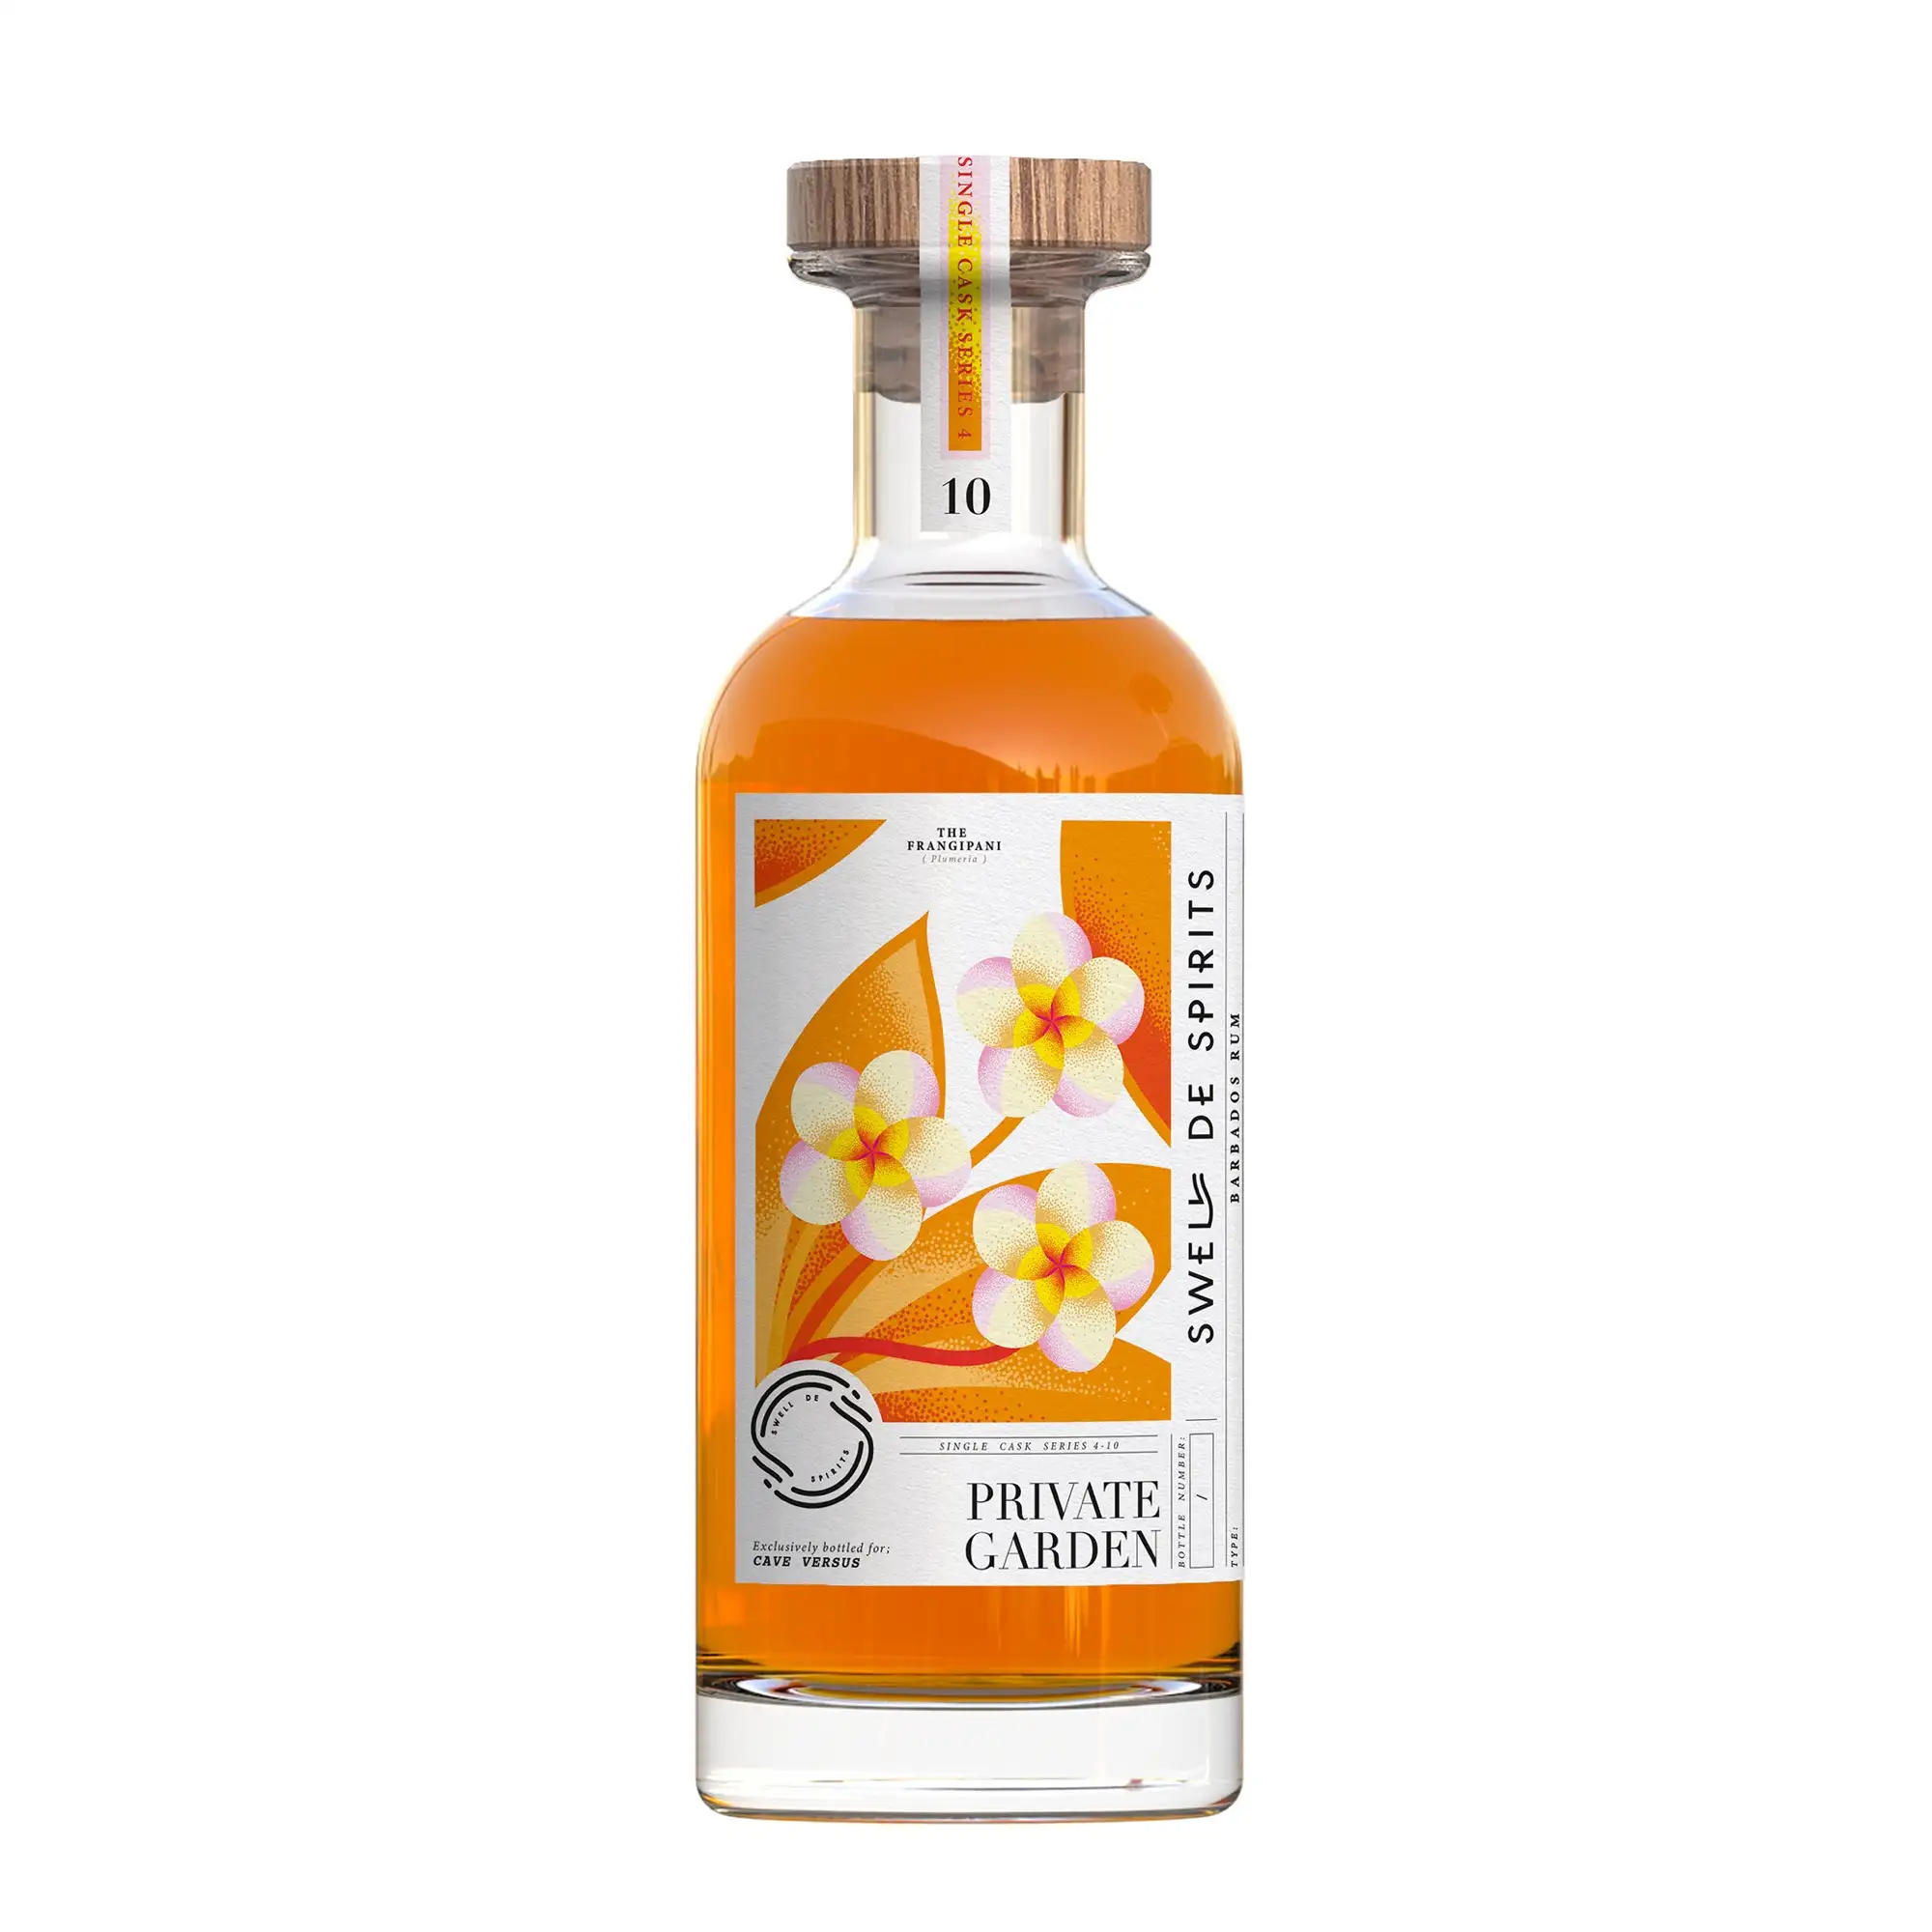 Image of the front of the bottle of the rum Private Garden N°10 (Versus)